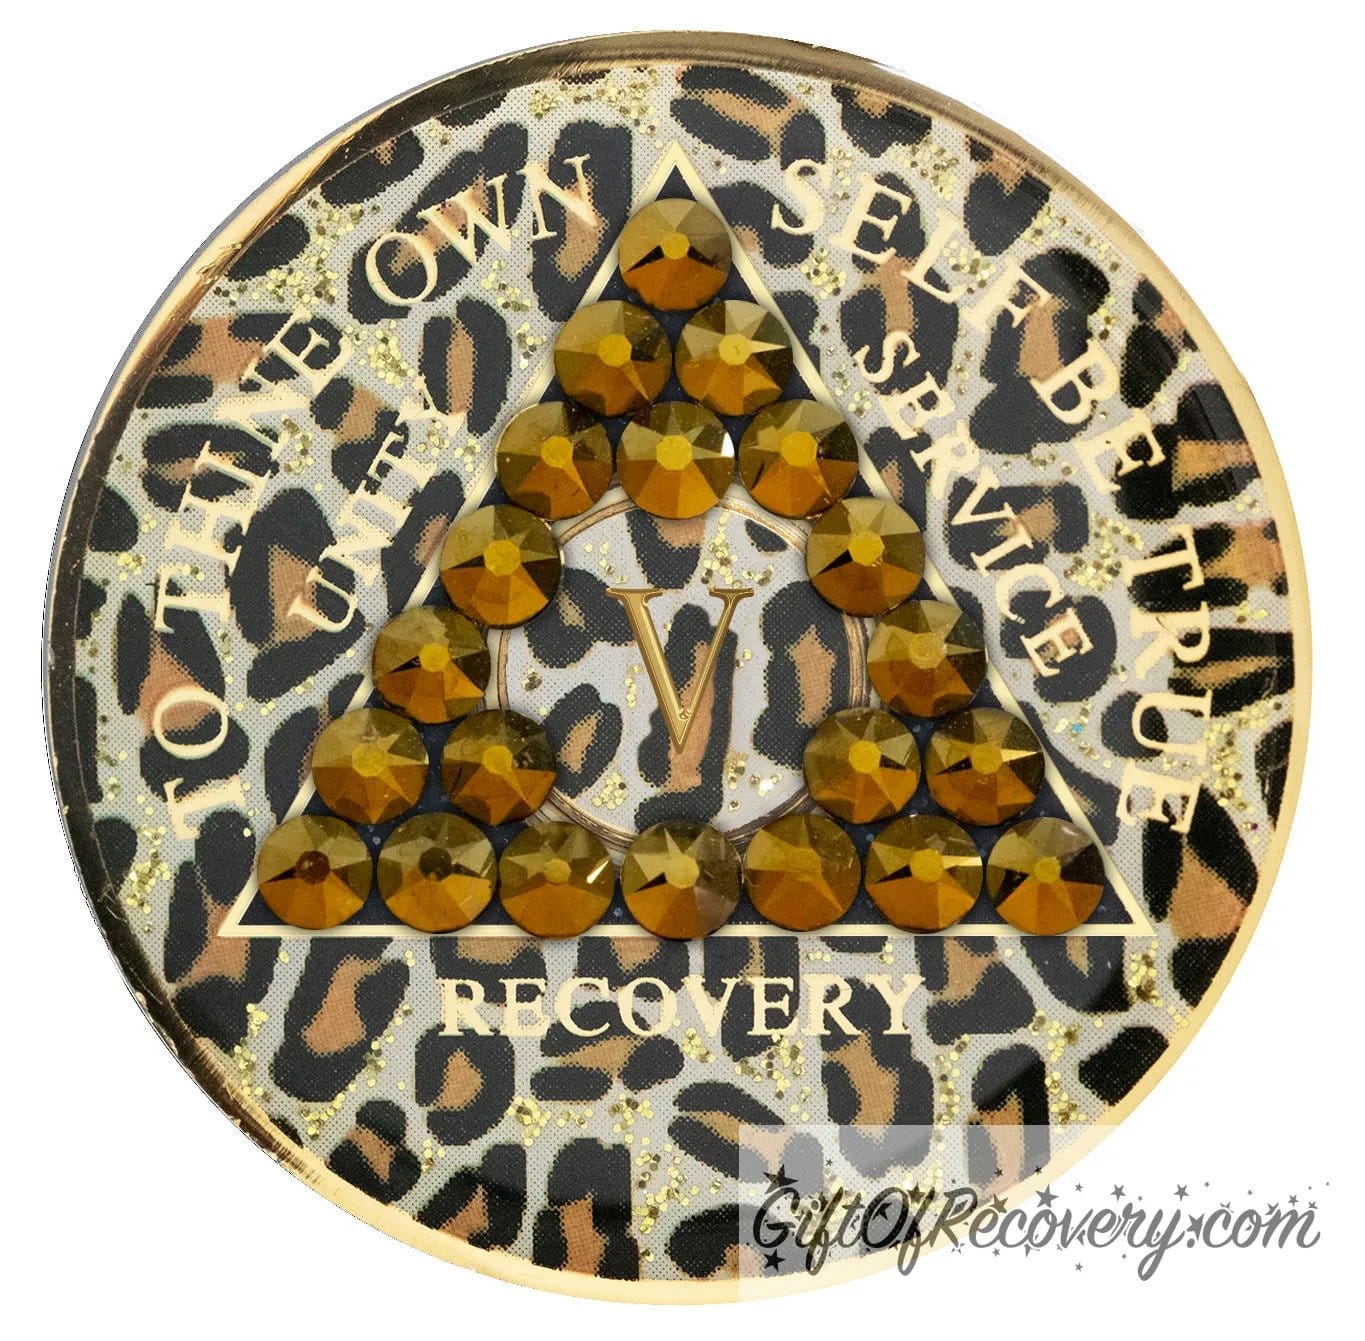 5 year AA medallion in leopard print with gold flake glitter spots and 21 genuine dorado crystals shaped in a triangle around the year, the outer rim is 14k gold and the unity, service, recovery, To thine own self be true and the year is 14k gold foil, let your sobriety shine, not your time.